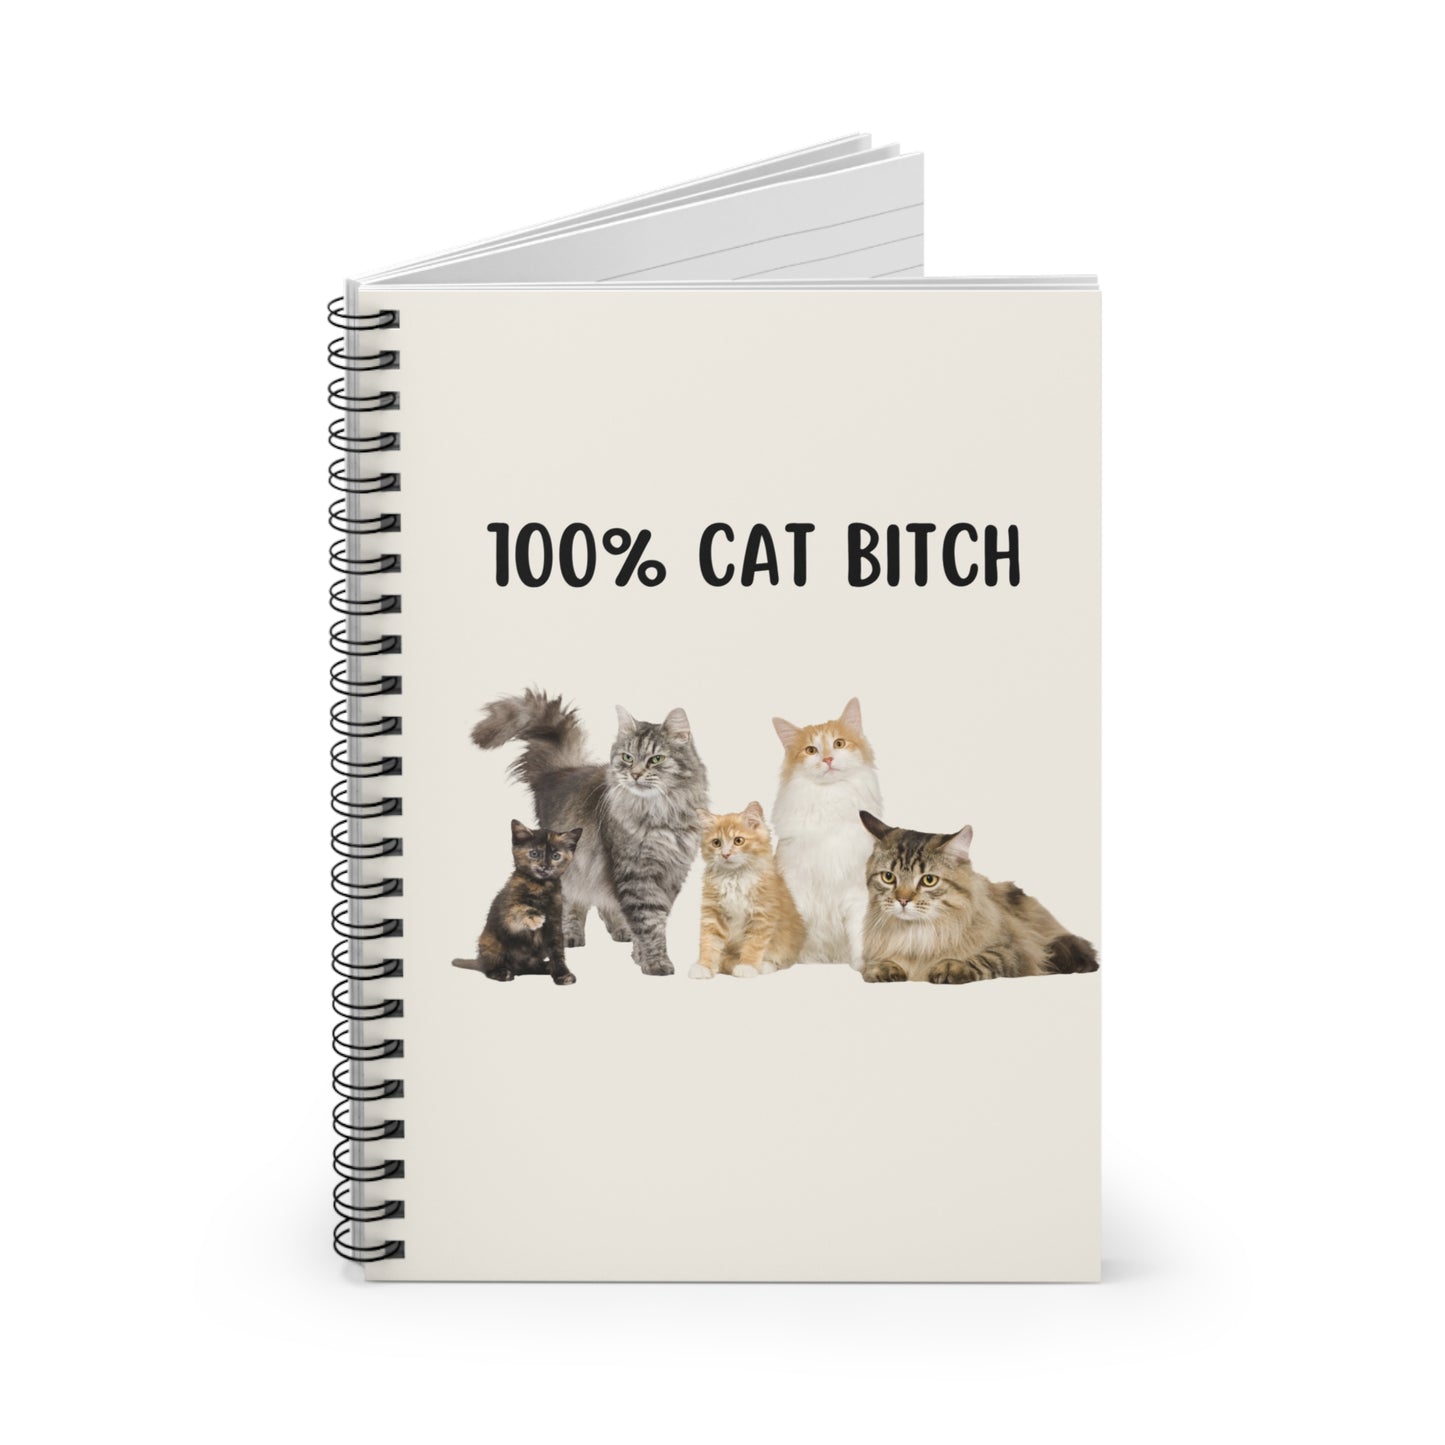 100% Cat B*tch Notebook, Funny Cat Notebook, Coworker Office Gifts, Cats Journal, Kawaii Cat Stationery